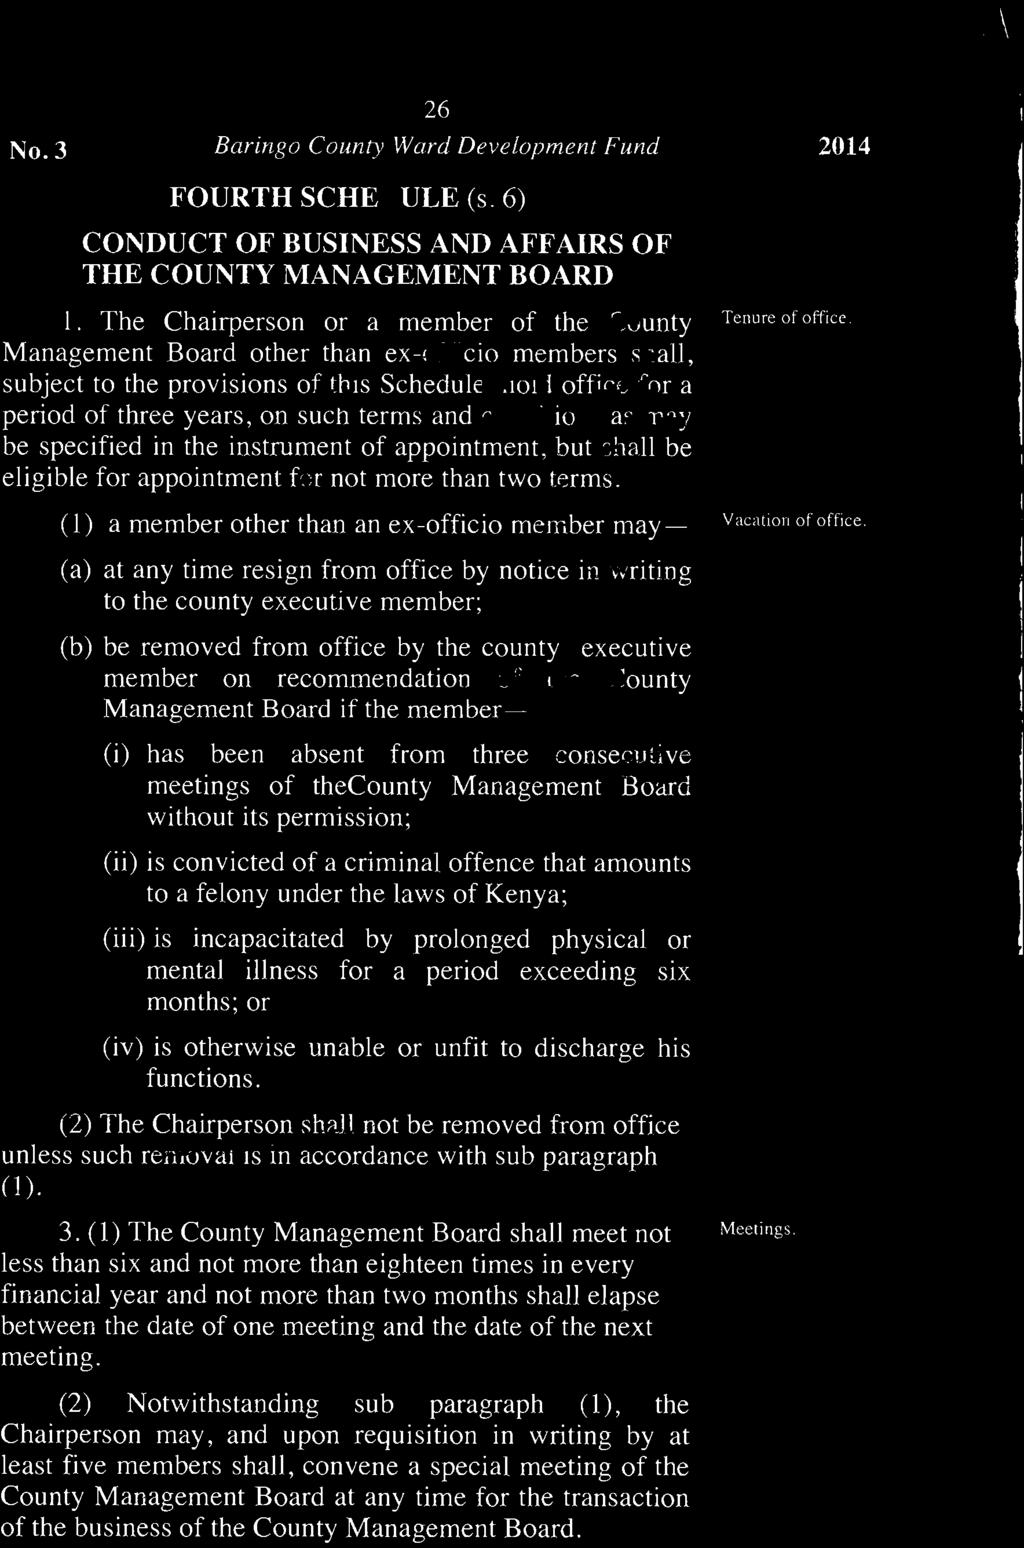 such terms and conditions as may be specified in the instrument of appointment, but shall be eligible for appointment for not more than two terms.